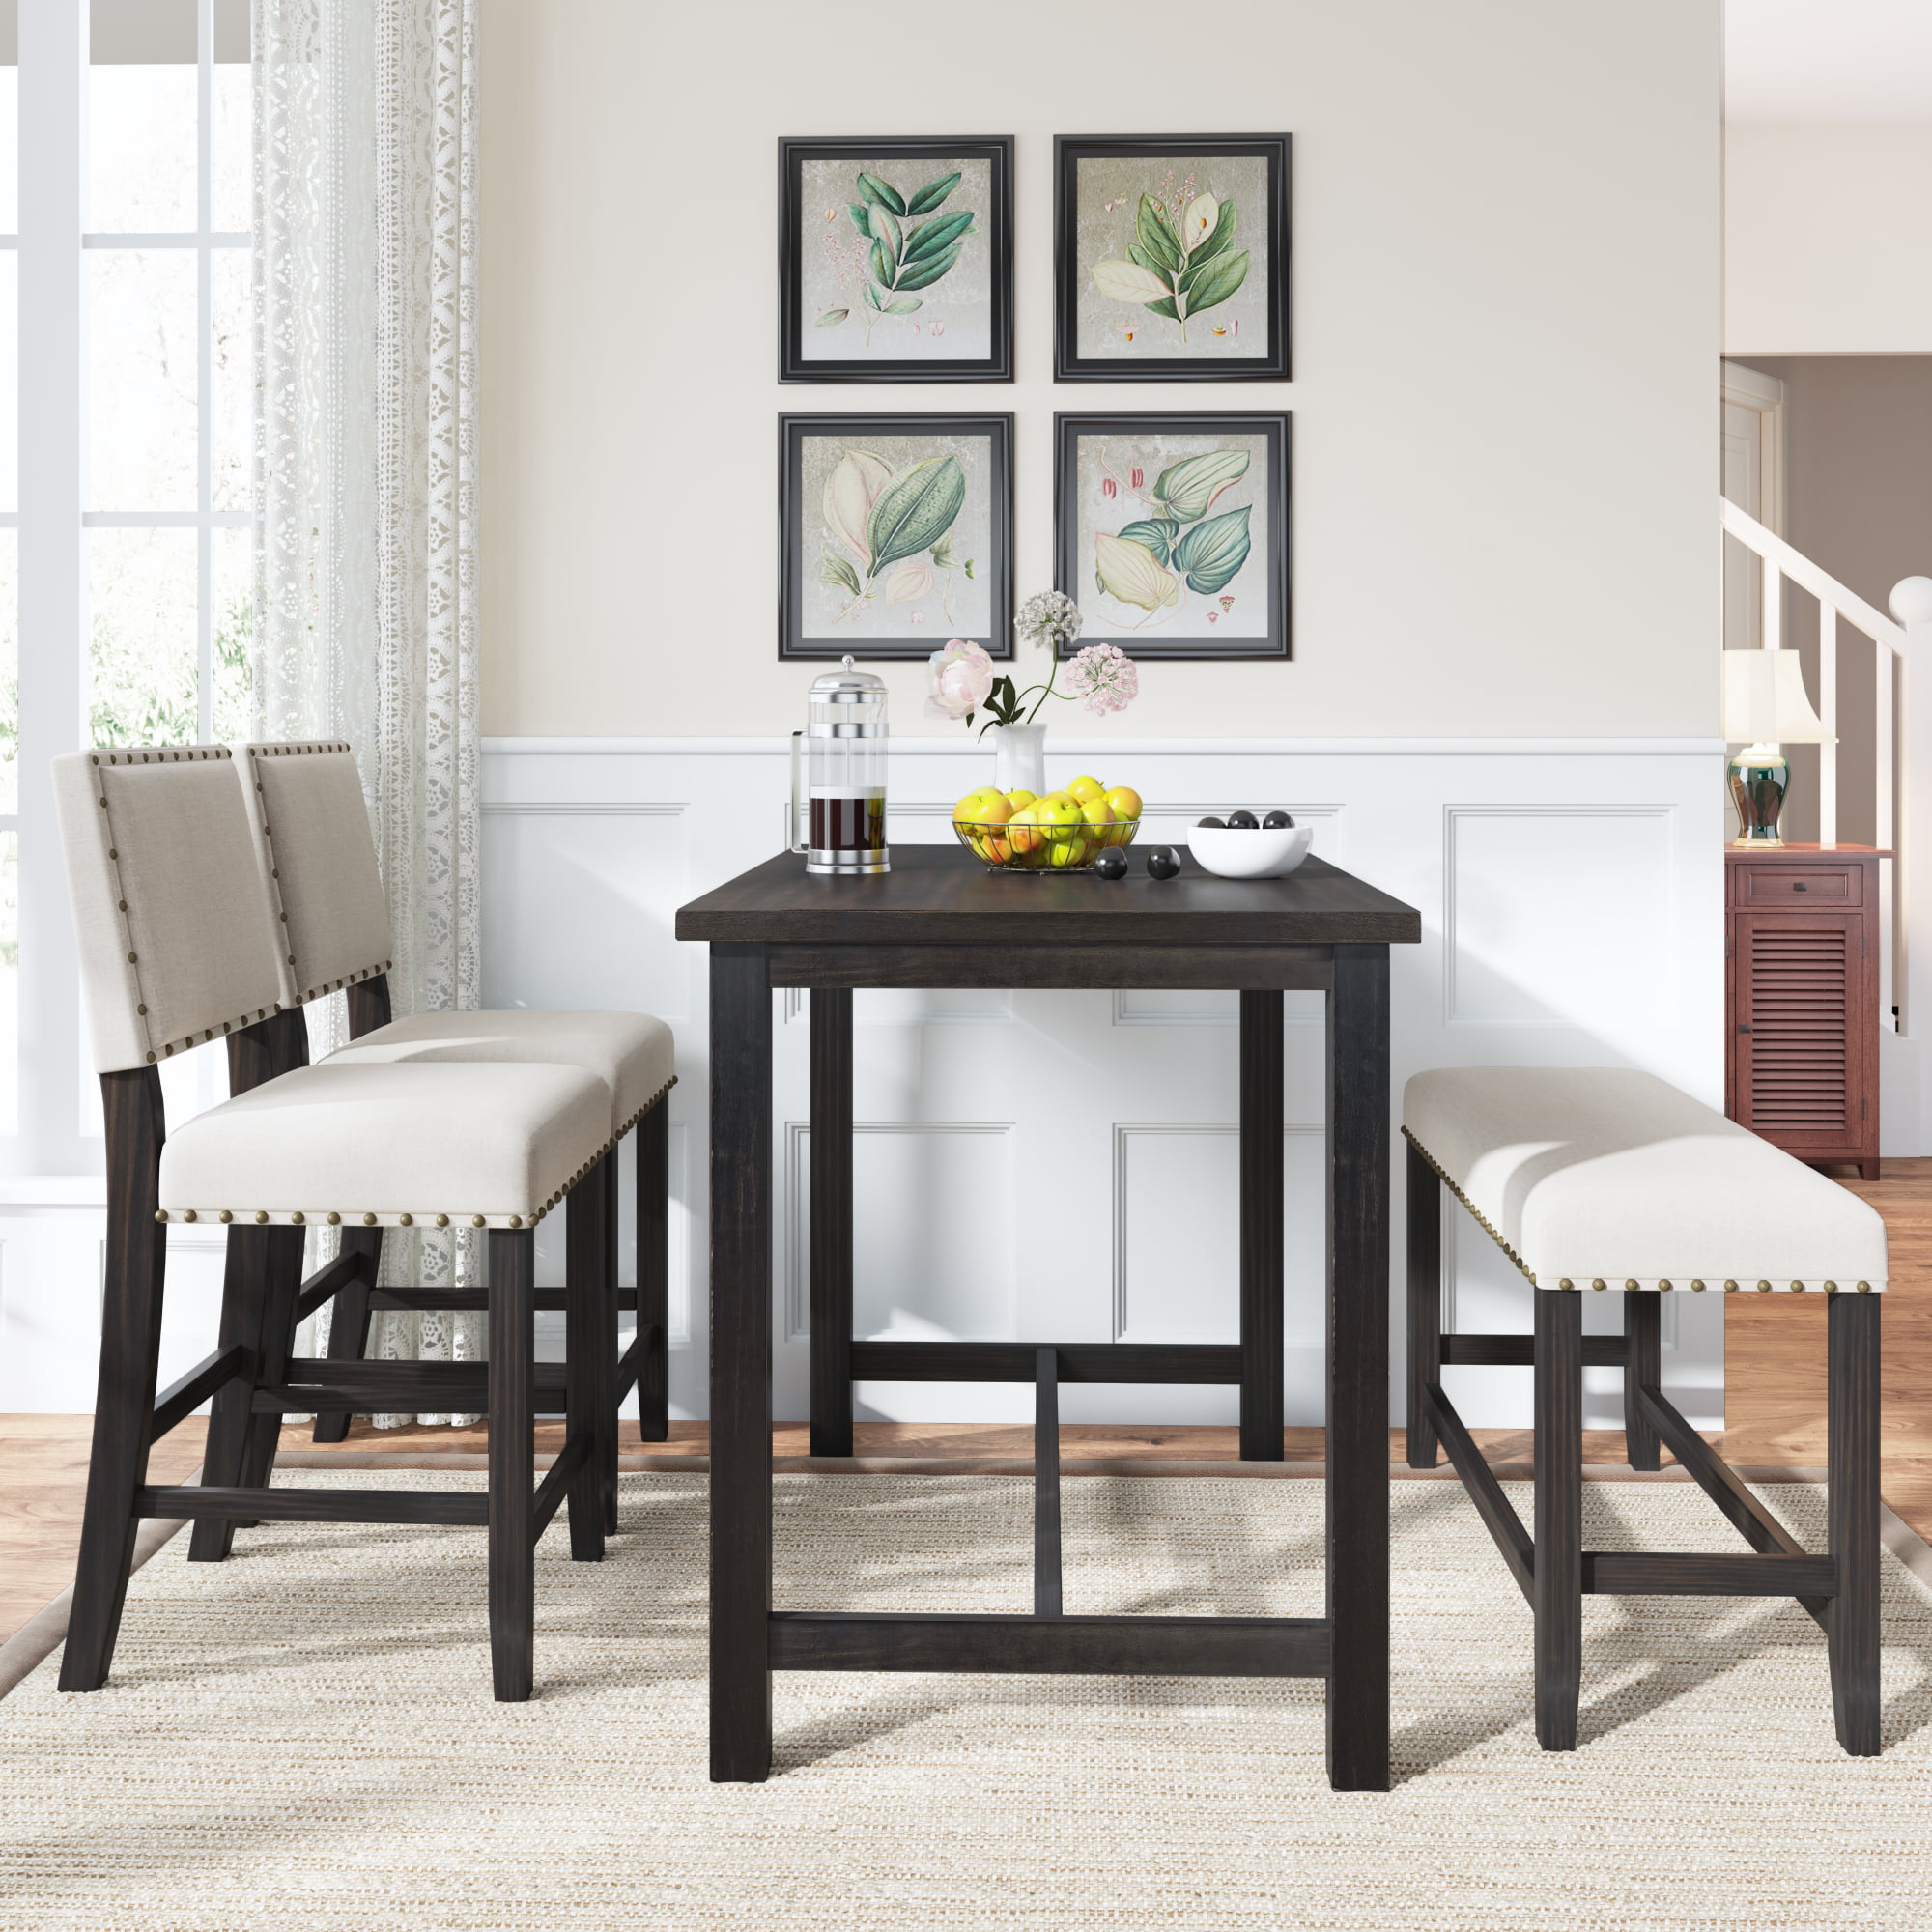 4 Piece Rustic Wooden Counter Height Dining Table Set - SH000157AAE